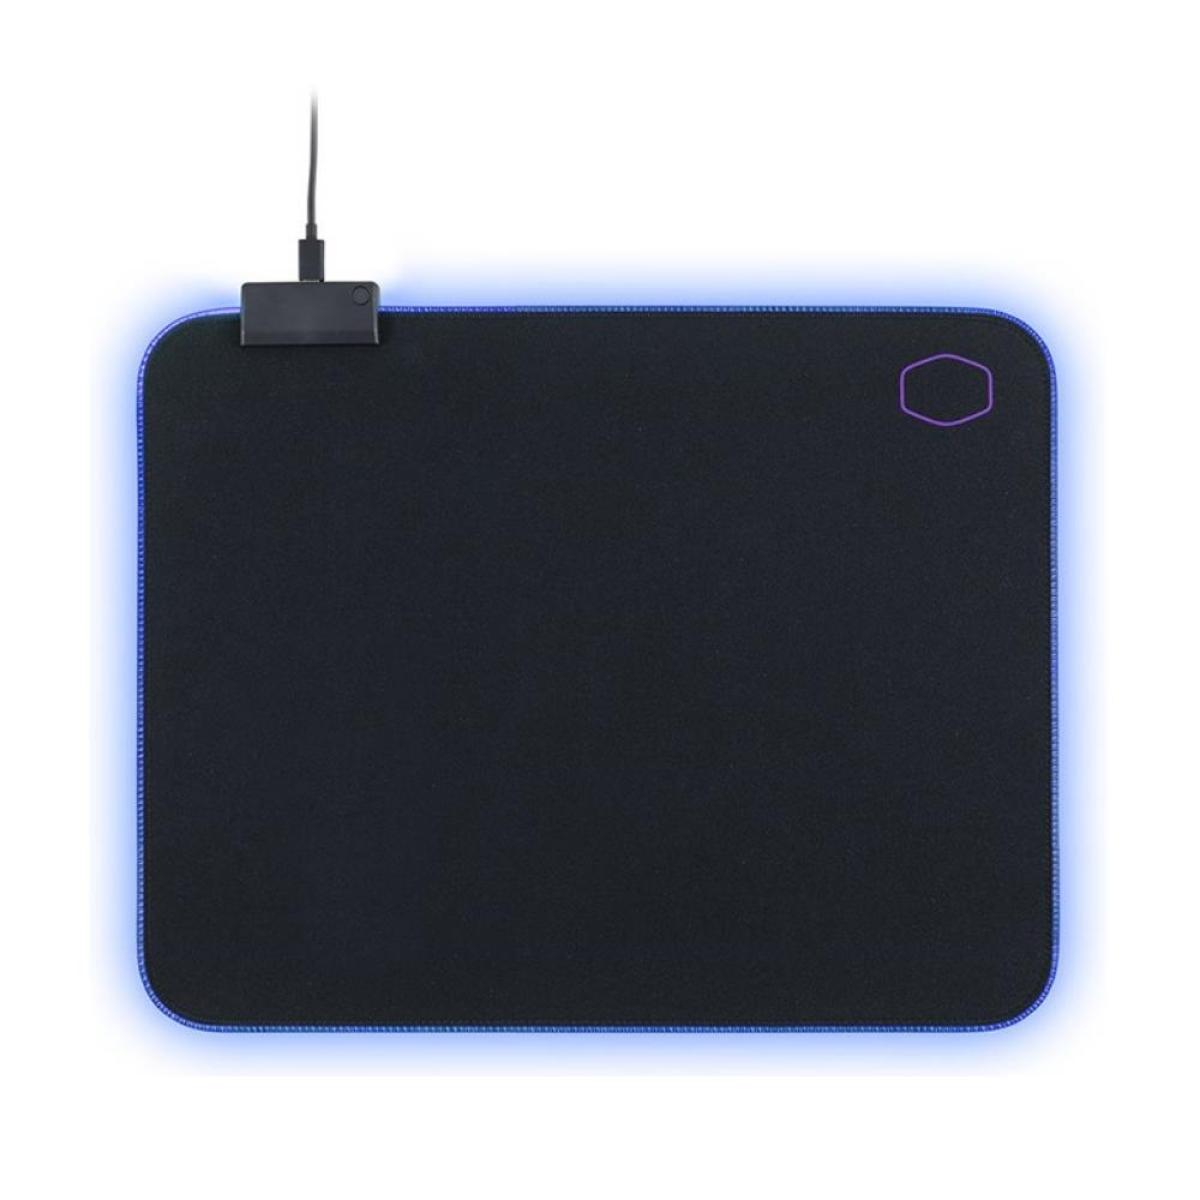 Cooler Master MPA-MP750- M Spill-Resistant, RGB GAMING Mouse pad